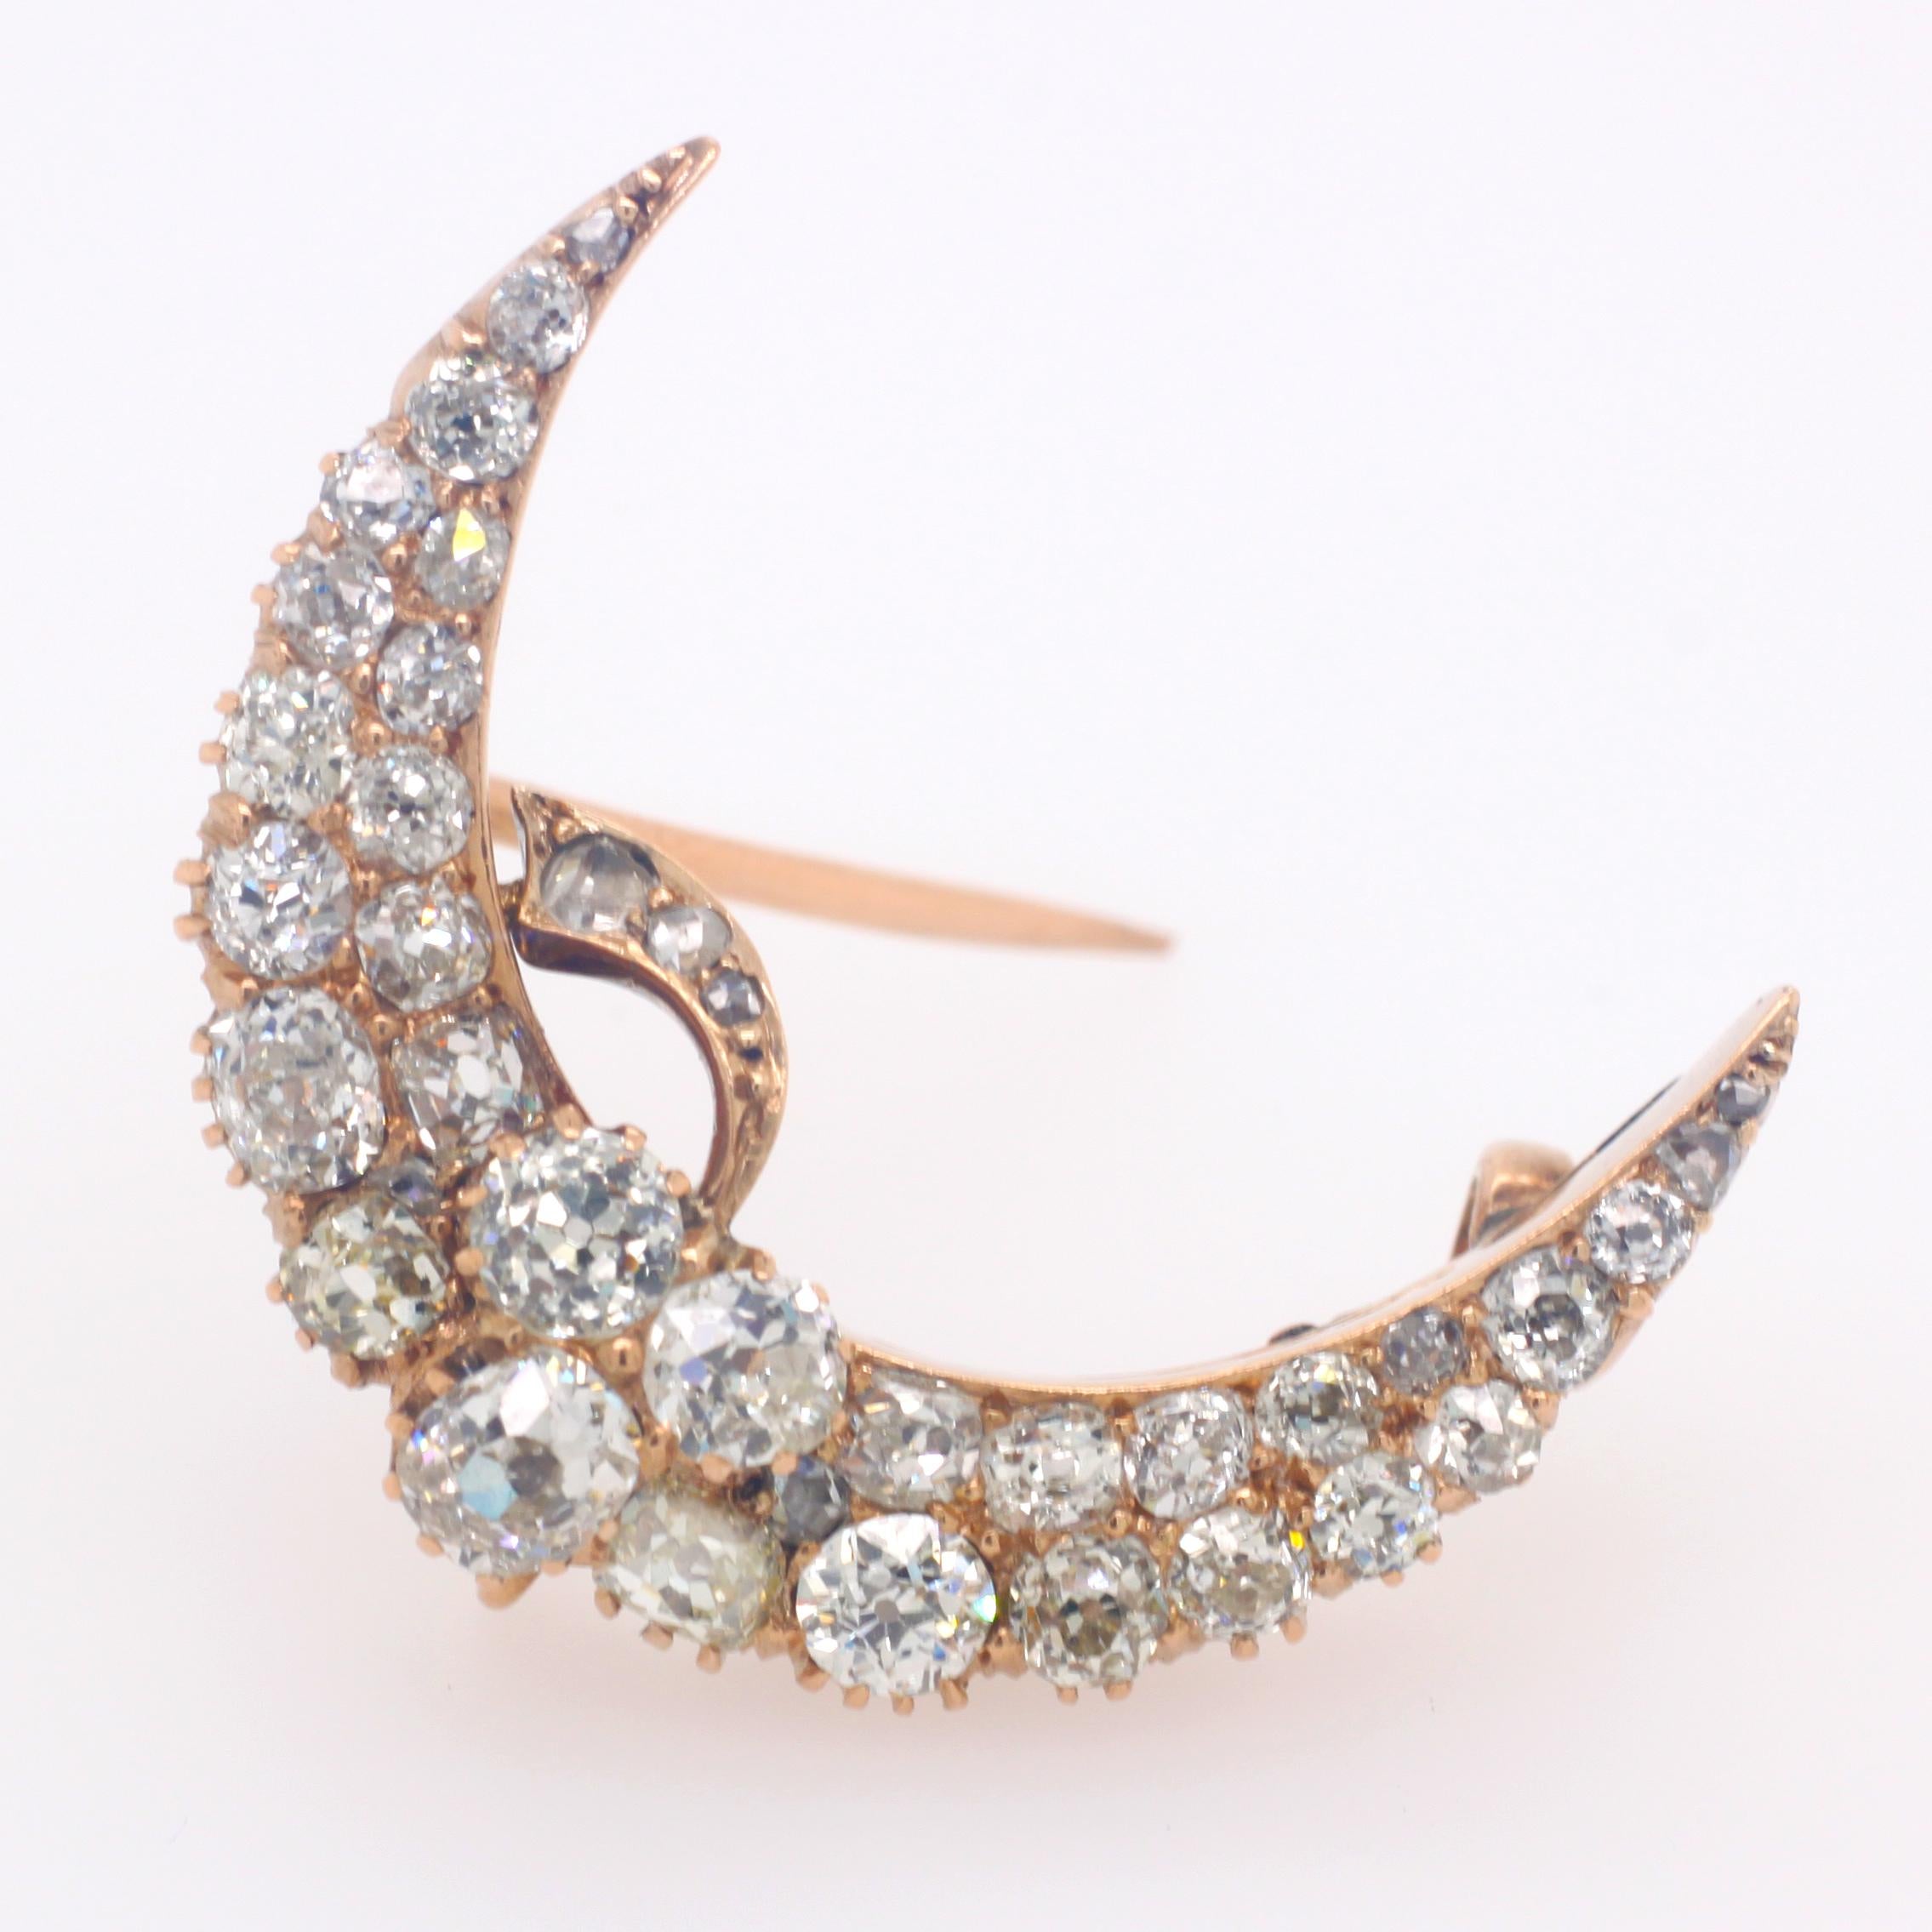 A Russian crescent moon and clover brooch in yellow gold, 1880s. The brooch, which has a loop and can be worn as a pendant, is set with old cut graduating diamonds, weighing approximately 3 carats. The brooch carries strong sentiments. Victorian